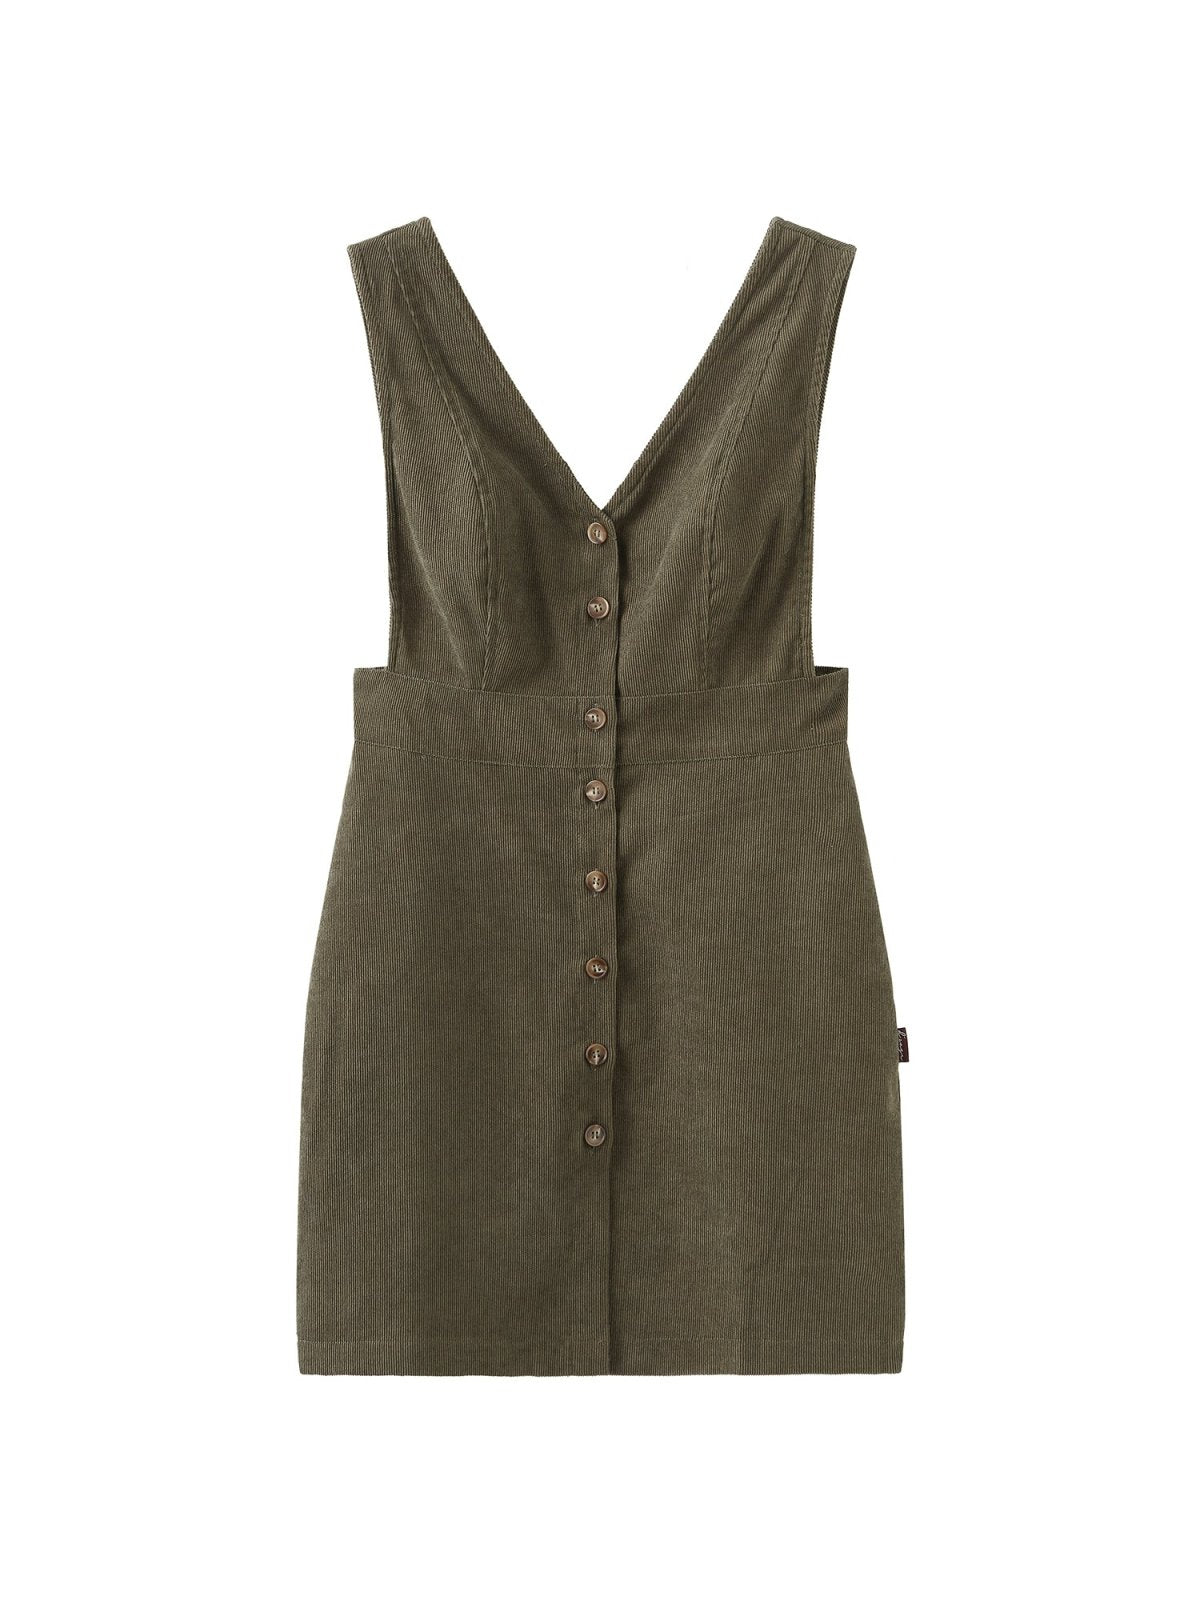 Marie Corduroy Buttoned Mini Dress - DAG-DD0072-22MatchaS - Olive Green - S - D'zage Designs